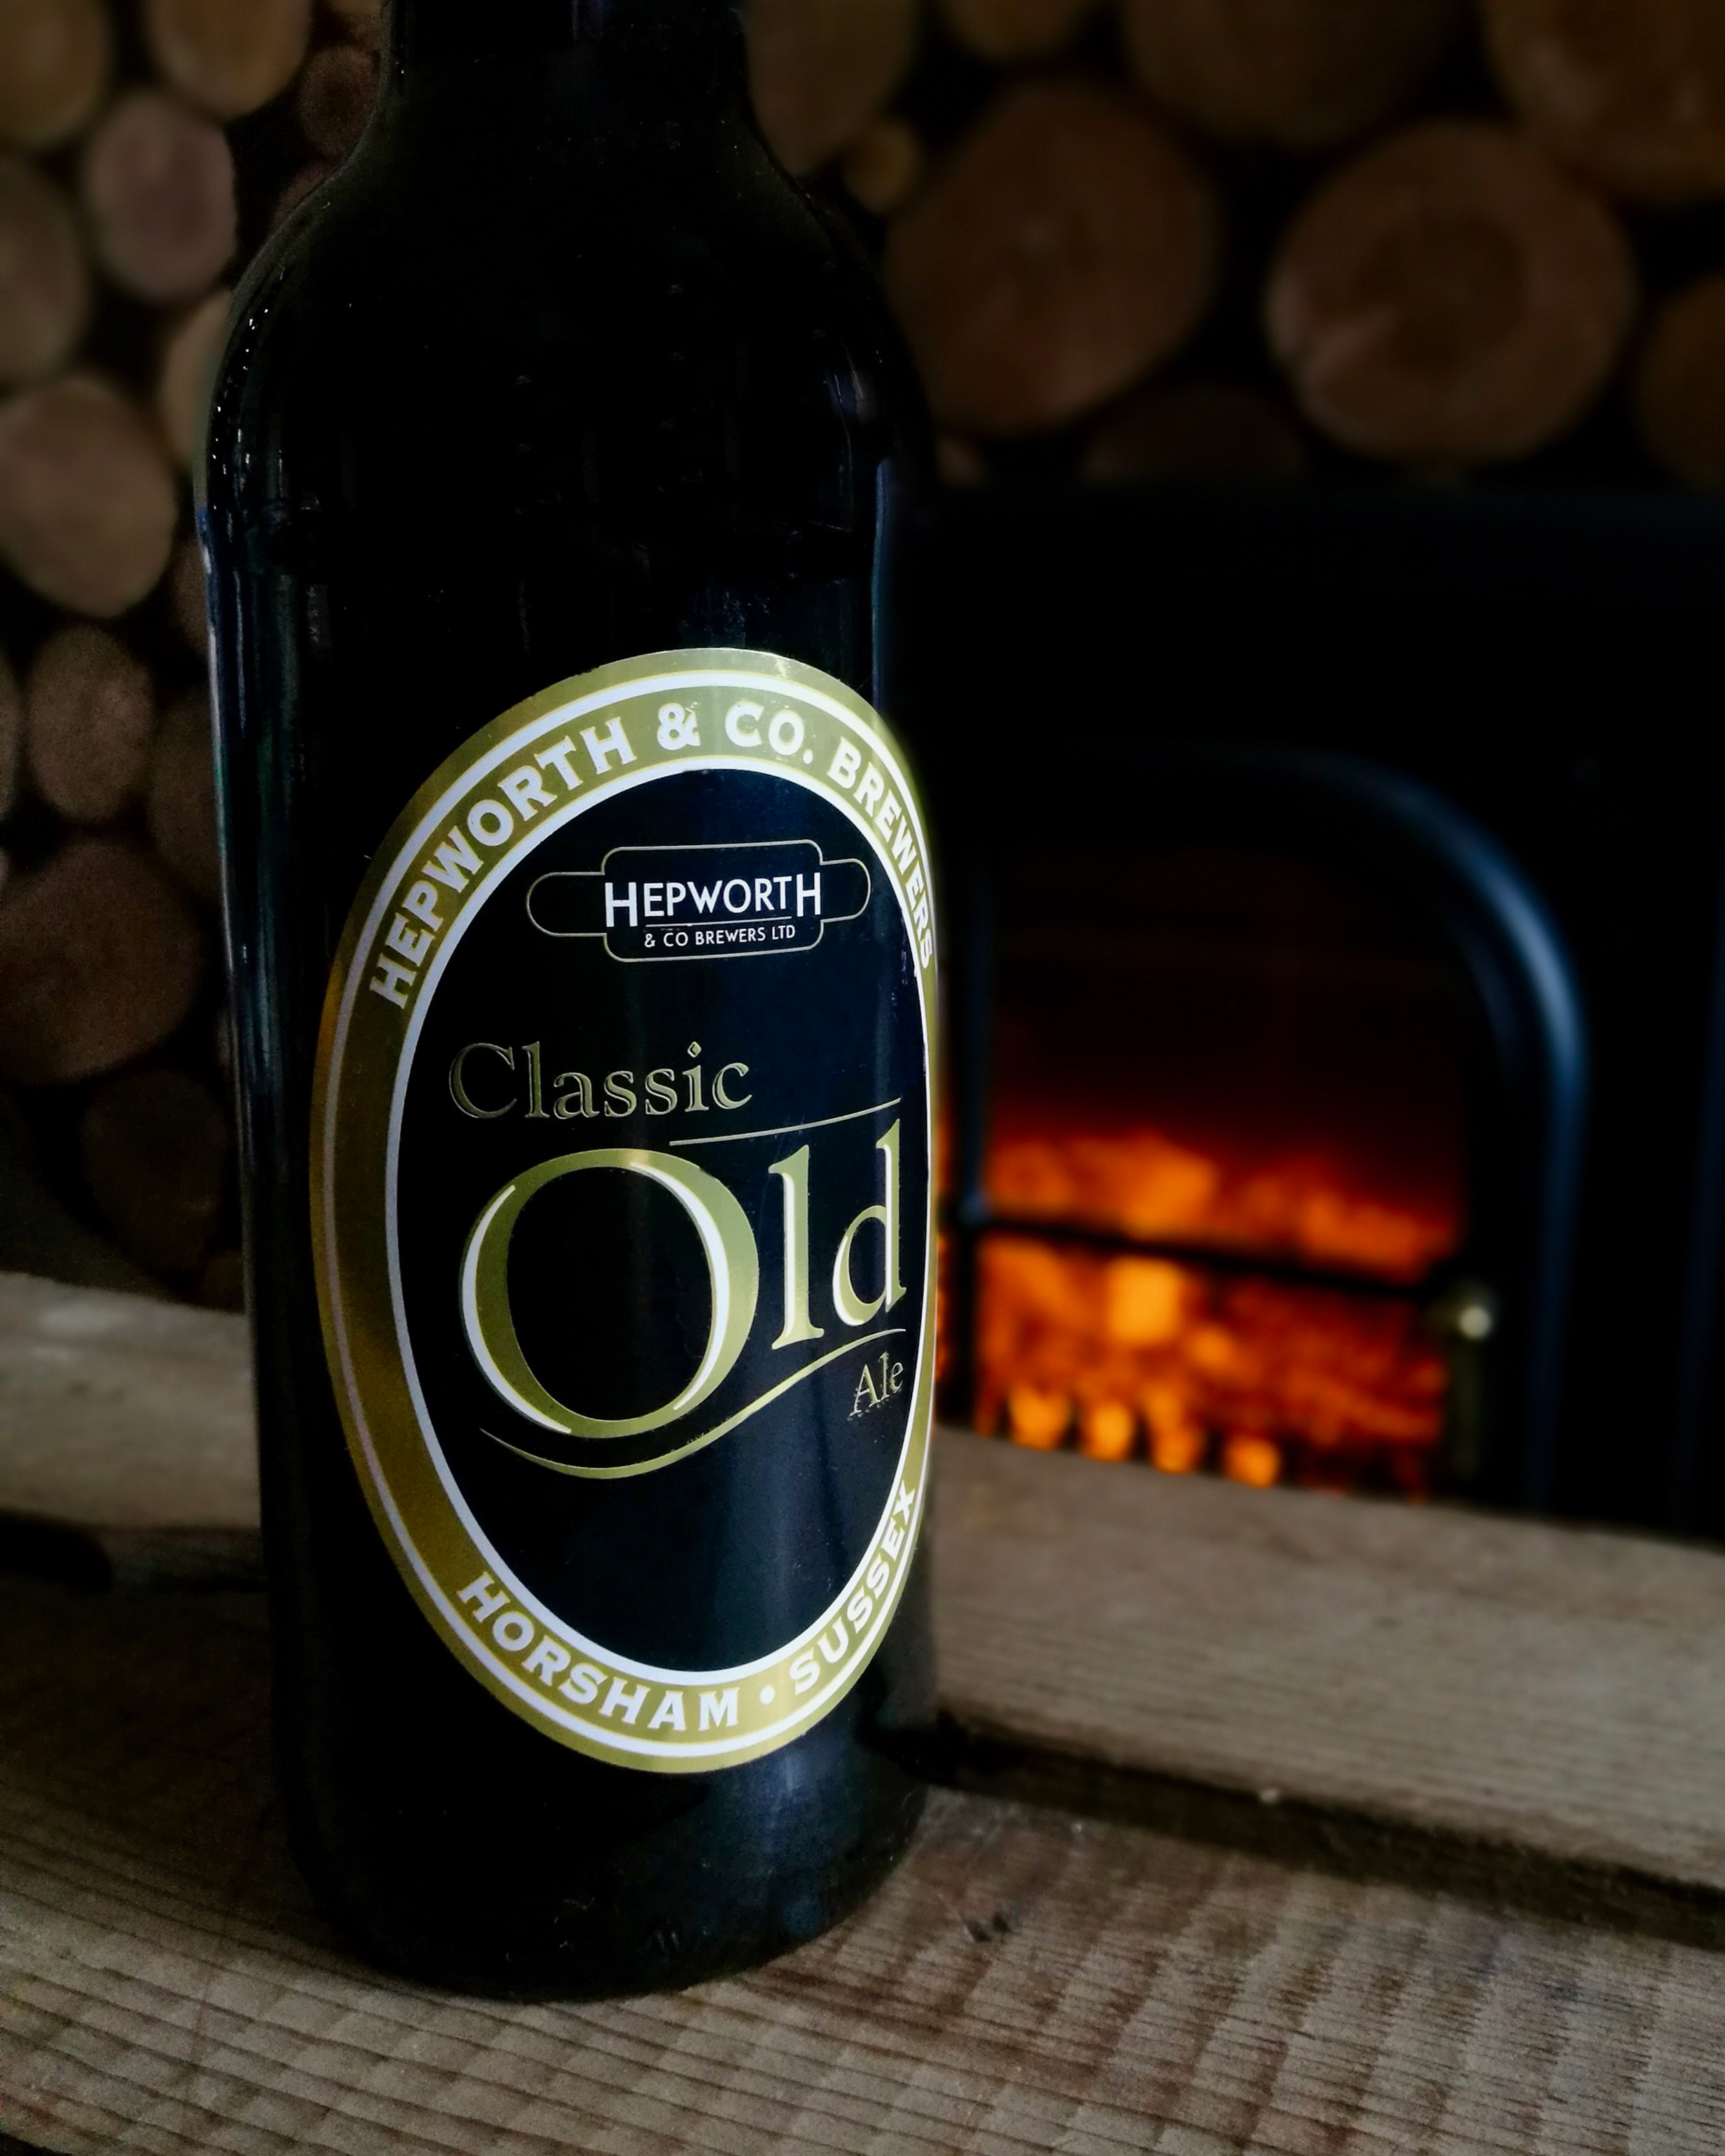 Picture of Classic Old Ale from Hepworth Brewery in Sussex for the Beer Yeti review.